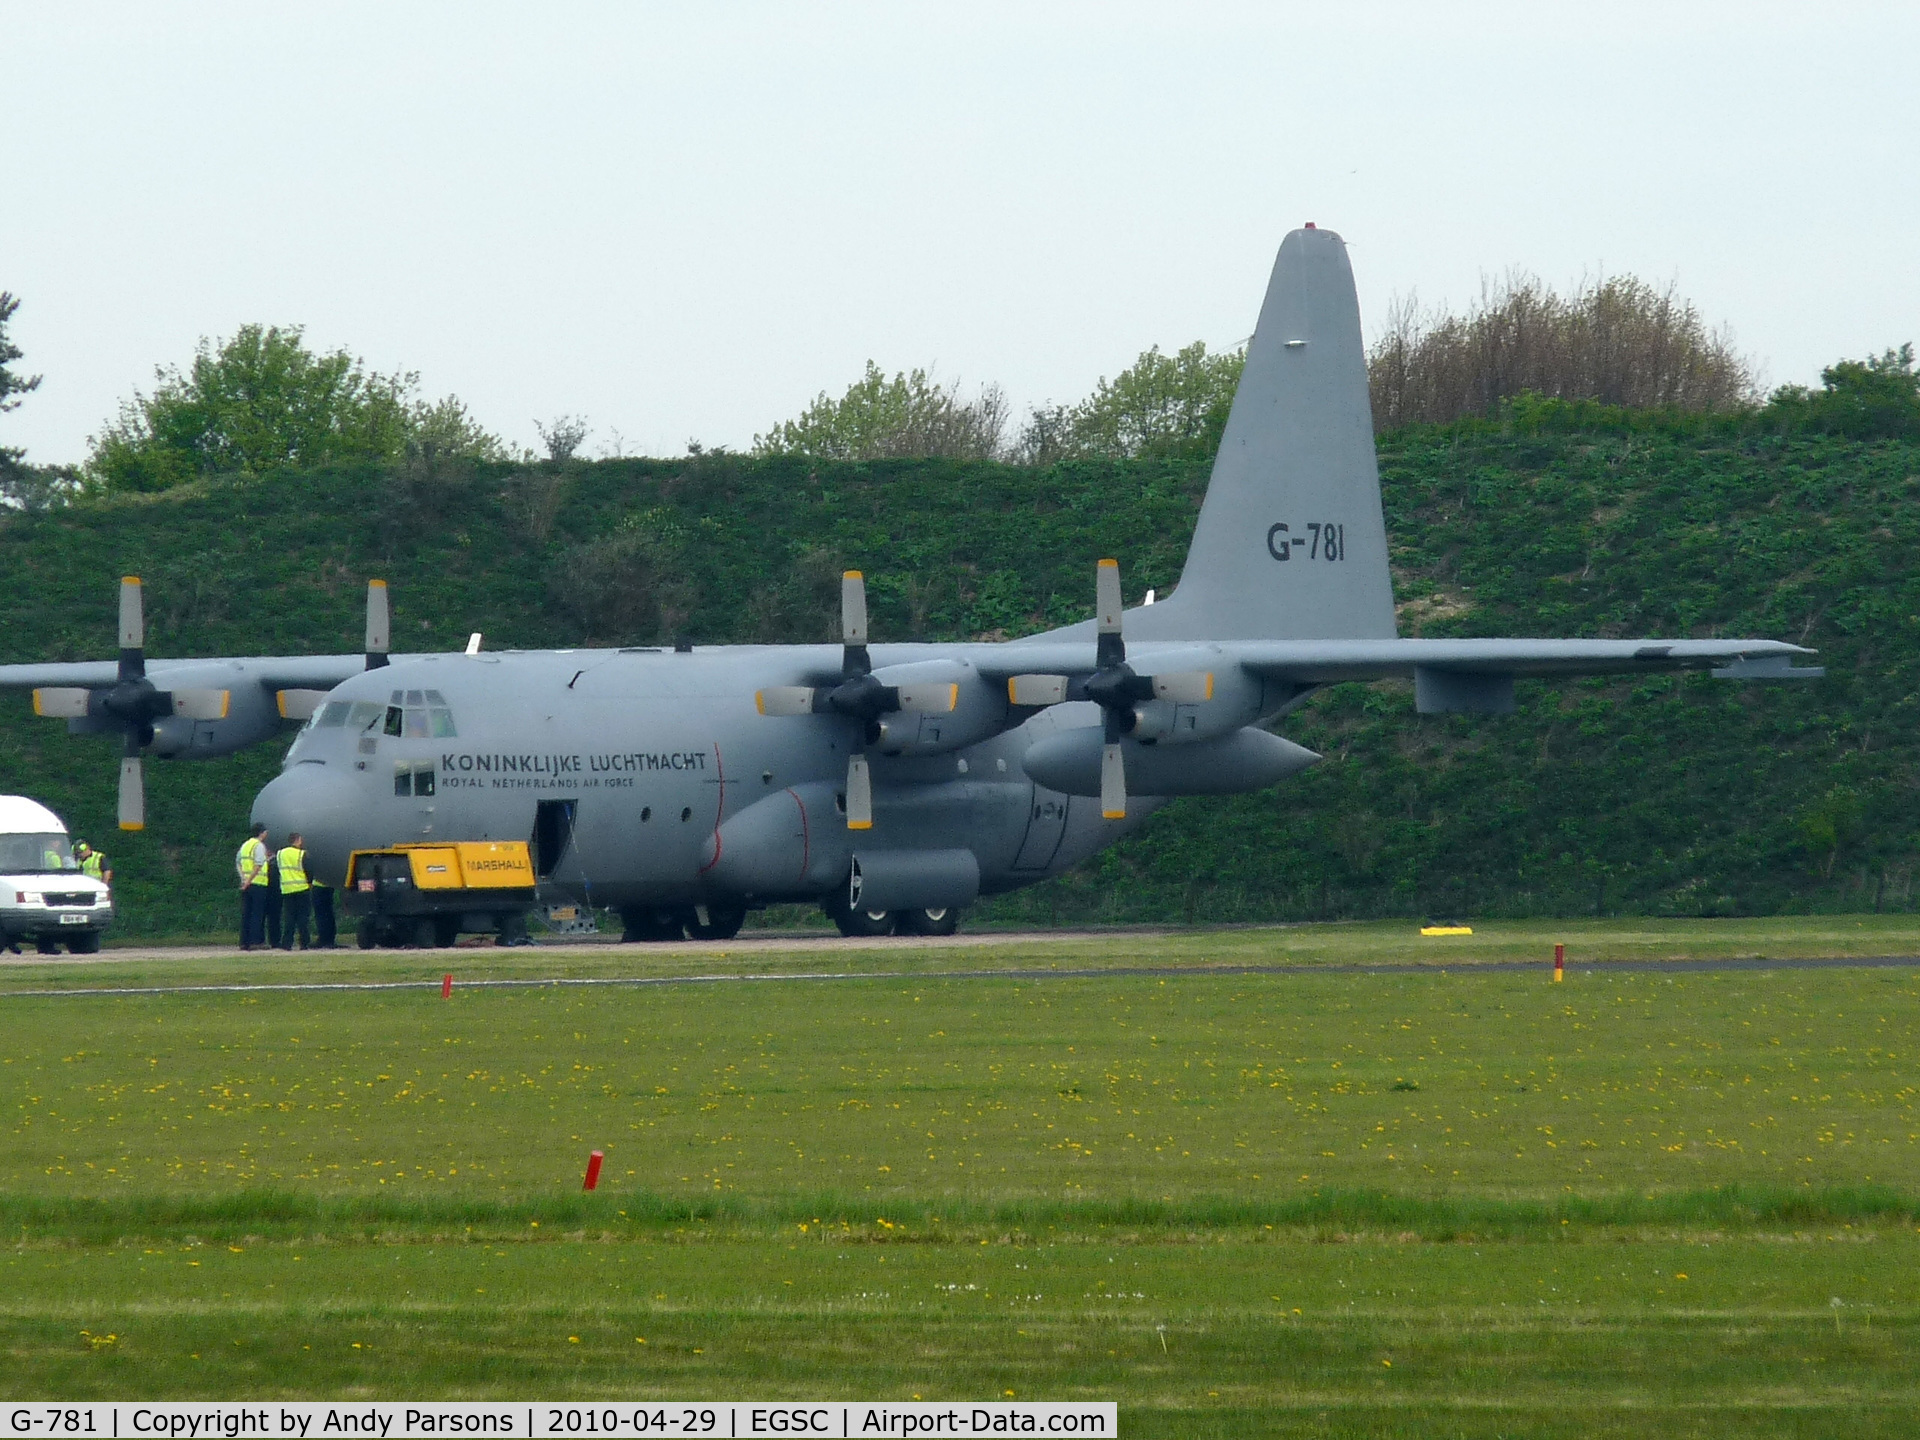 G-781, Lockheed C-130H Hercules C/N 382-4781, Latest herc for RNLAF being prepared for service at Cambridge